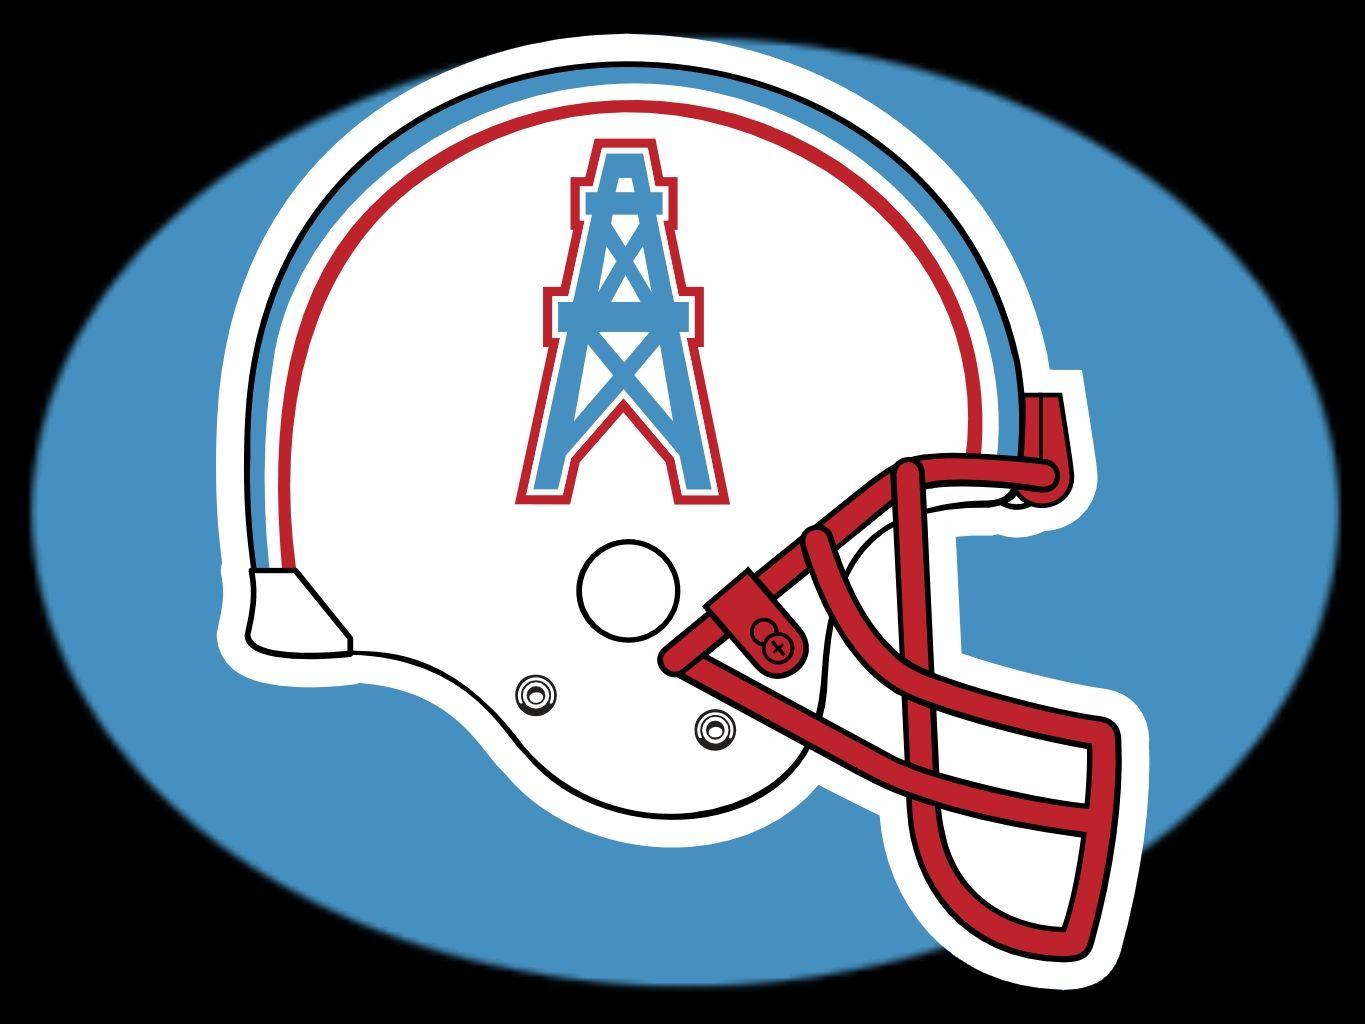 Houston Oilers Wallpapers Top Free Houston Oilers Backgrounds